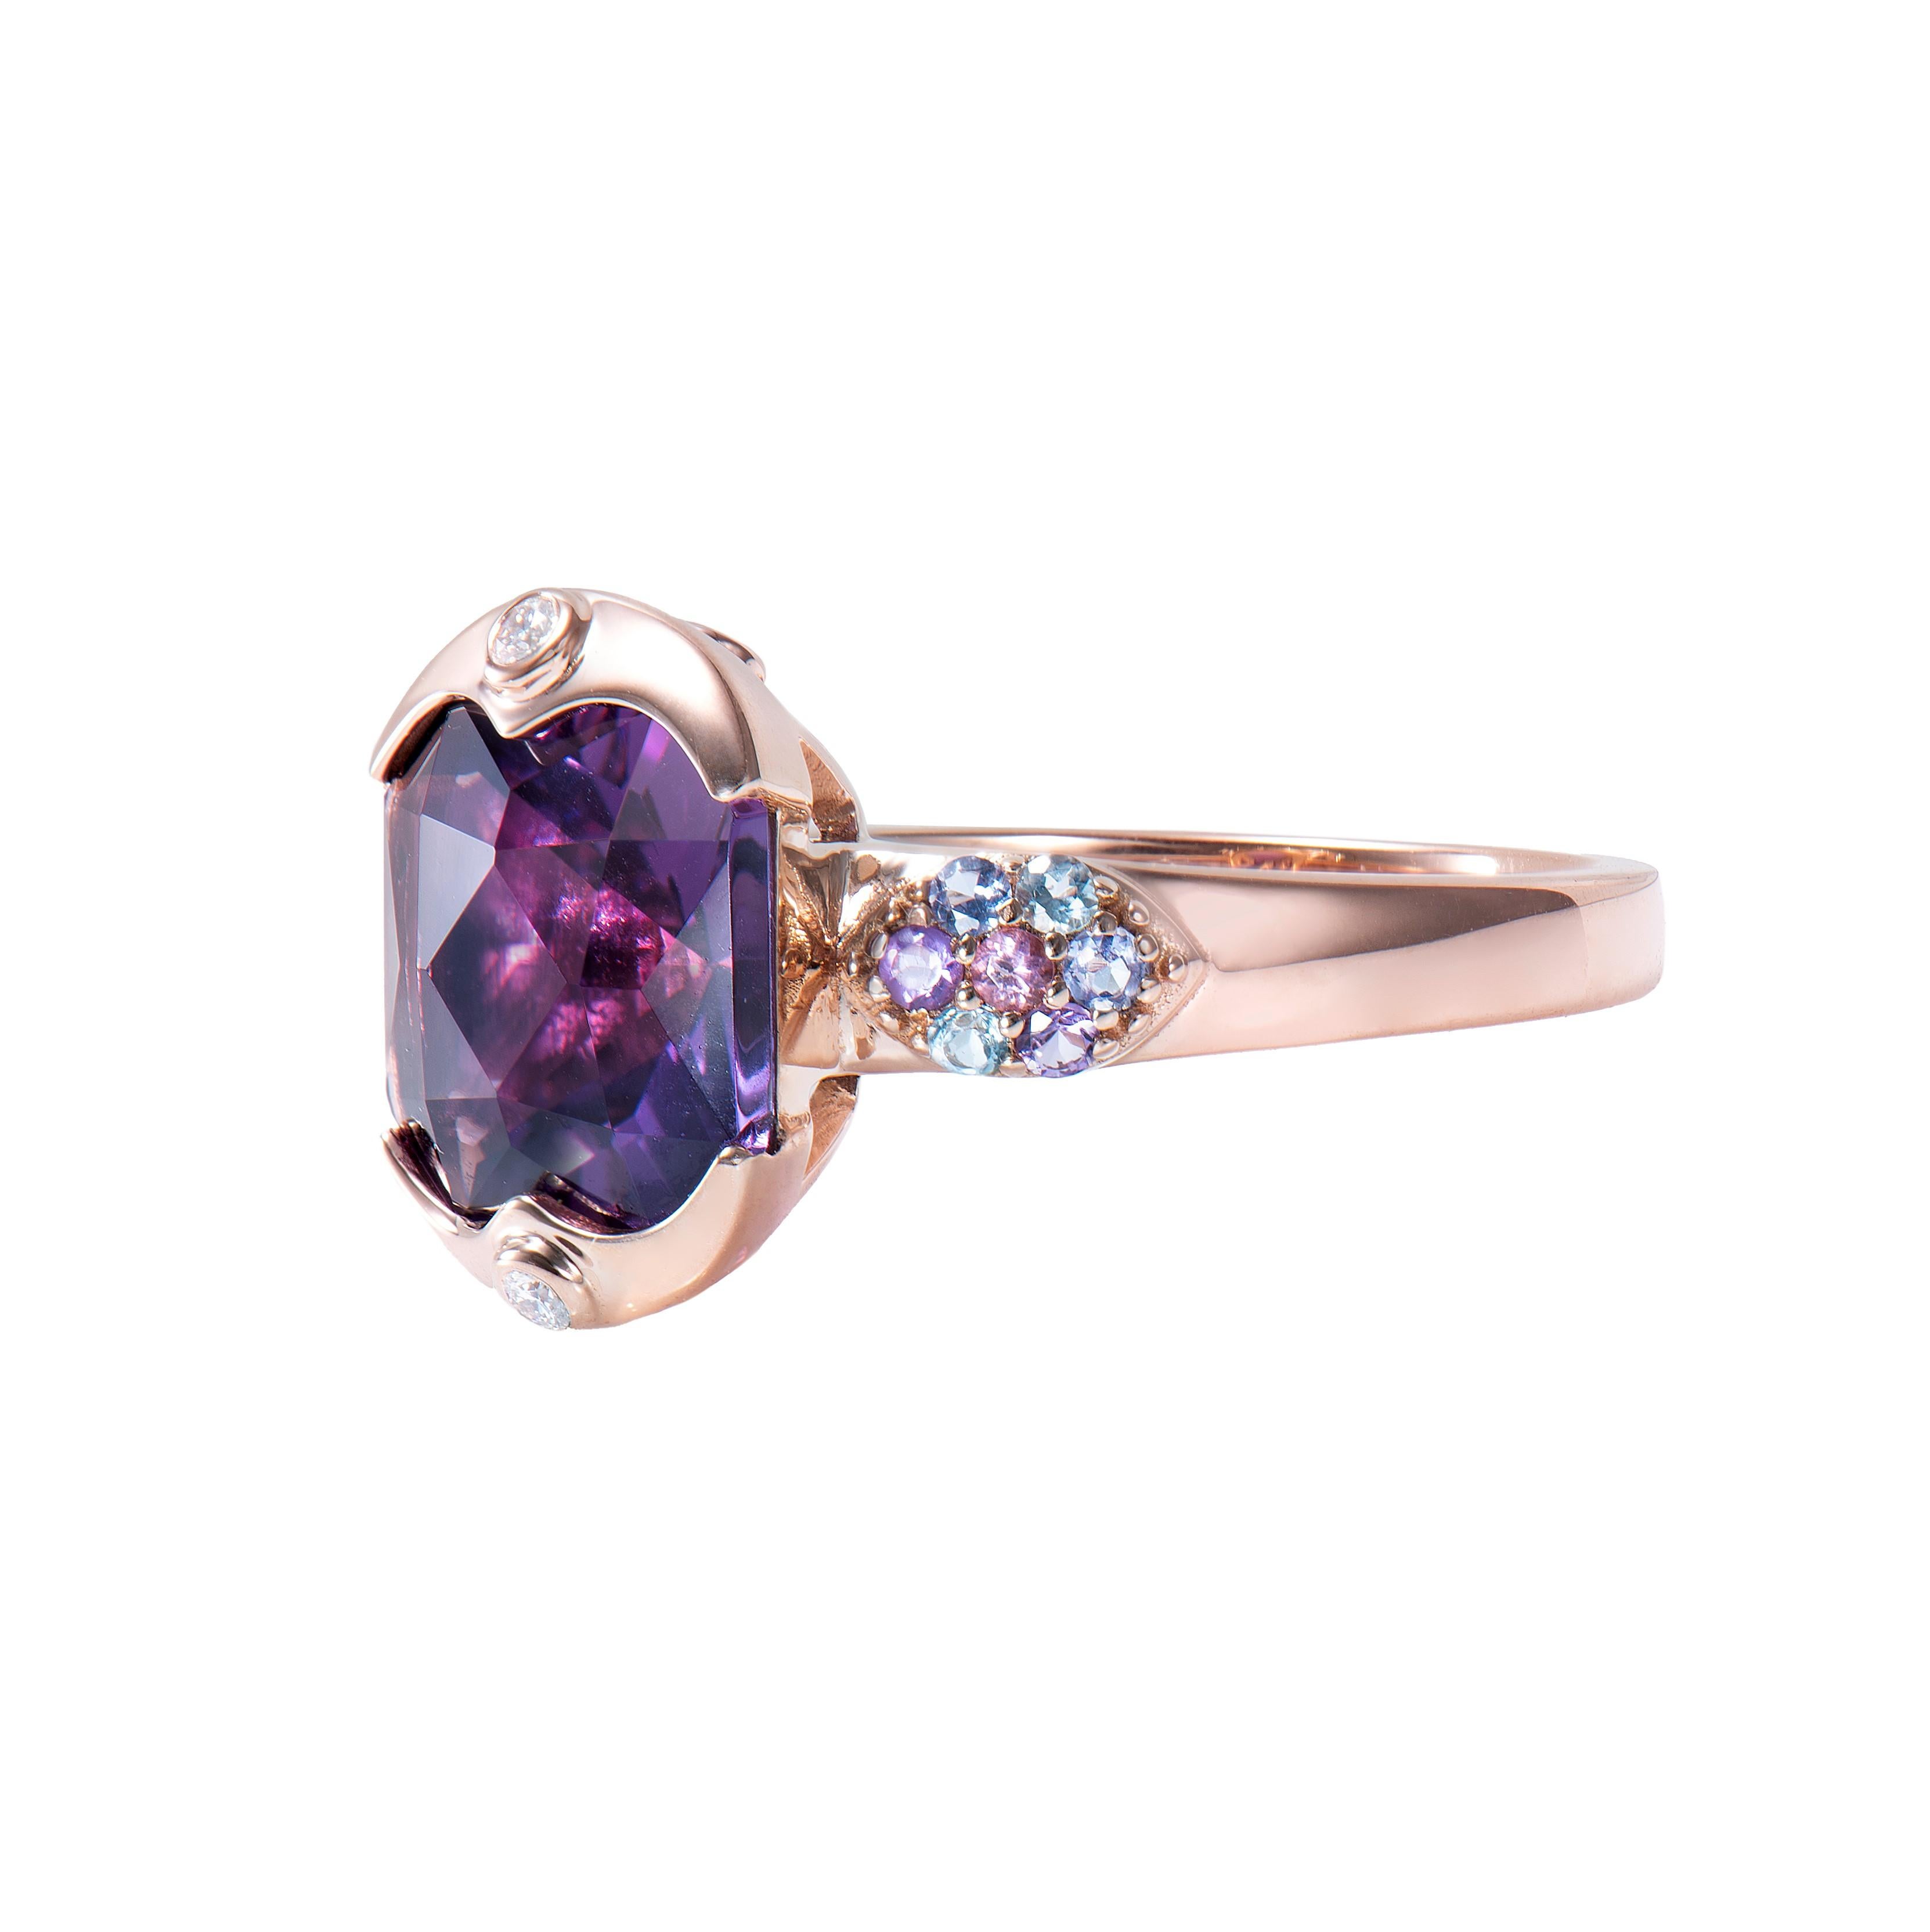 Sunita Nahata presents a collection of alluring amethyst cocktail rings. Amethysts are particularly known to bring powerful energies to Aquarians or those born in February. In general, it is said to calm and de-stress wearers, and alleviate all